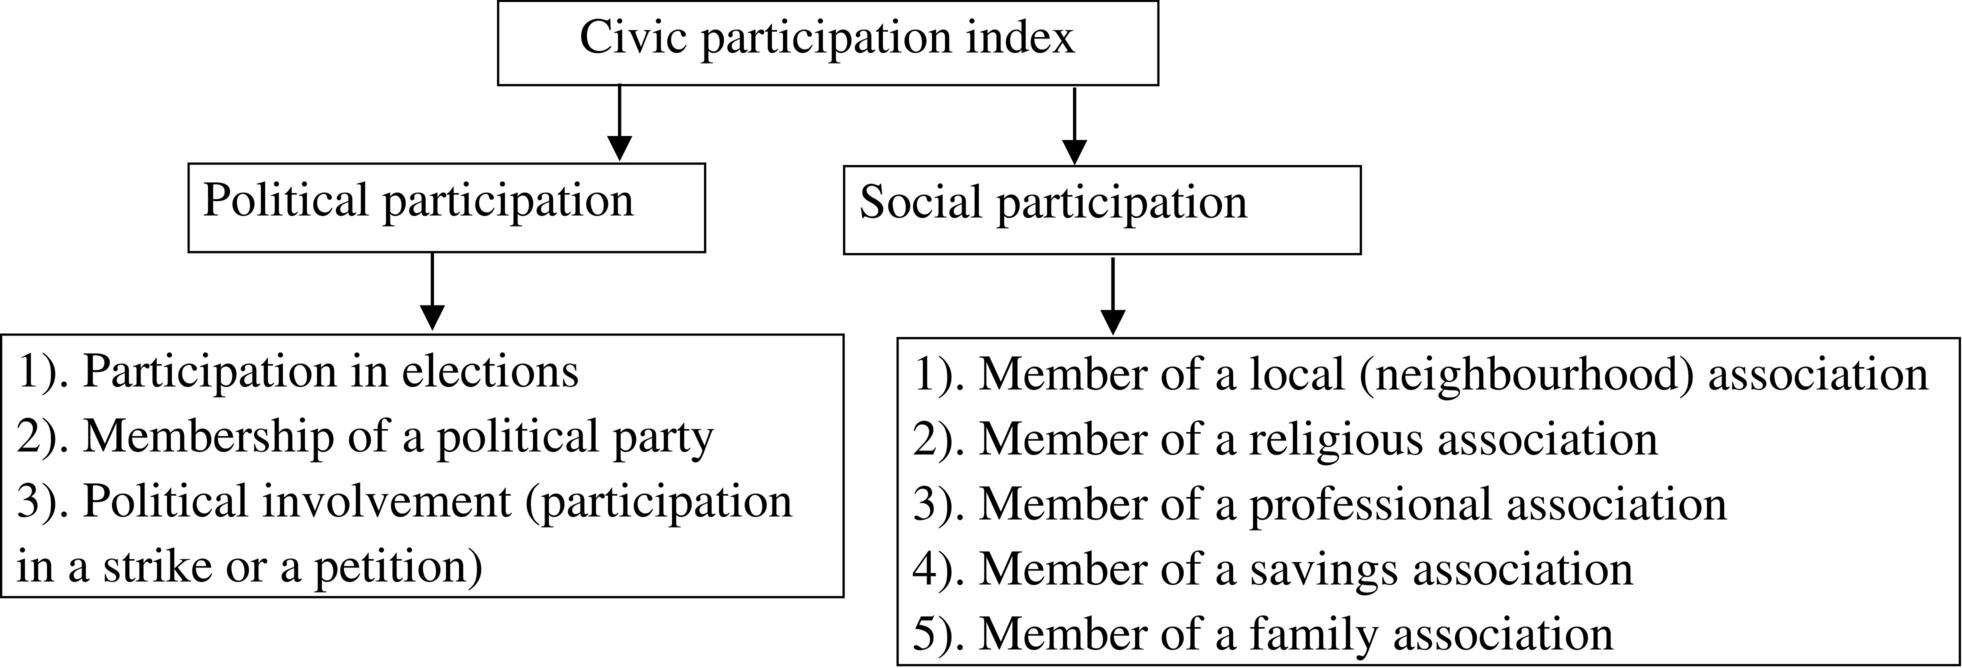 Construction of the civic participation index.